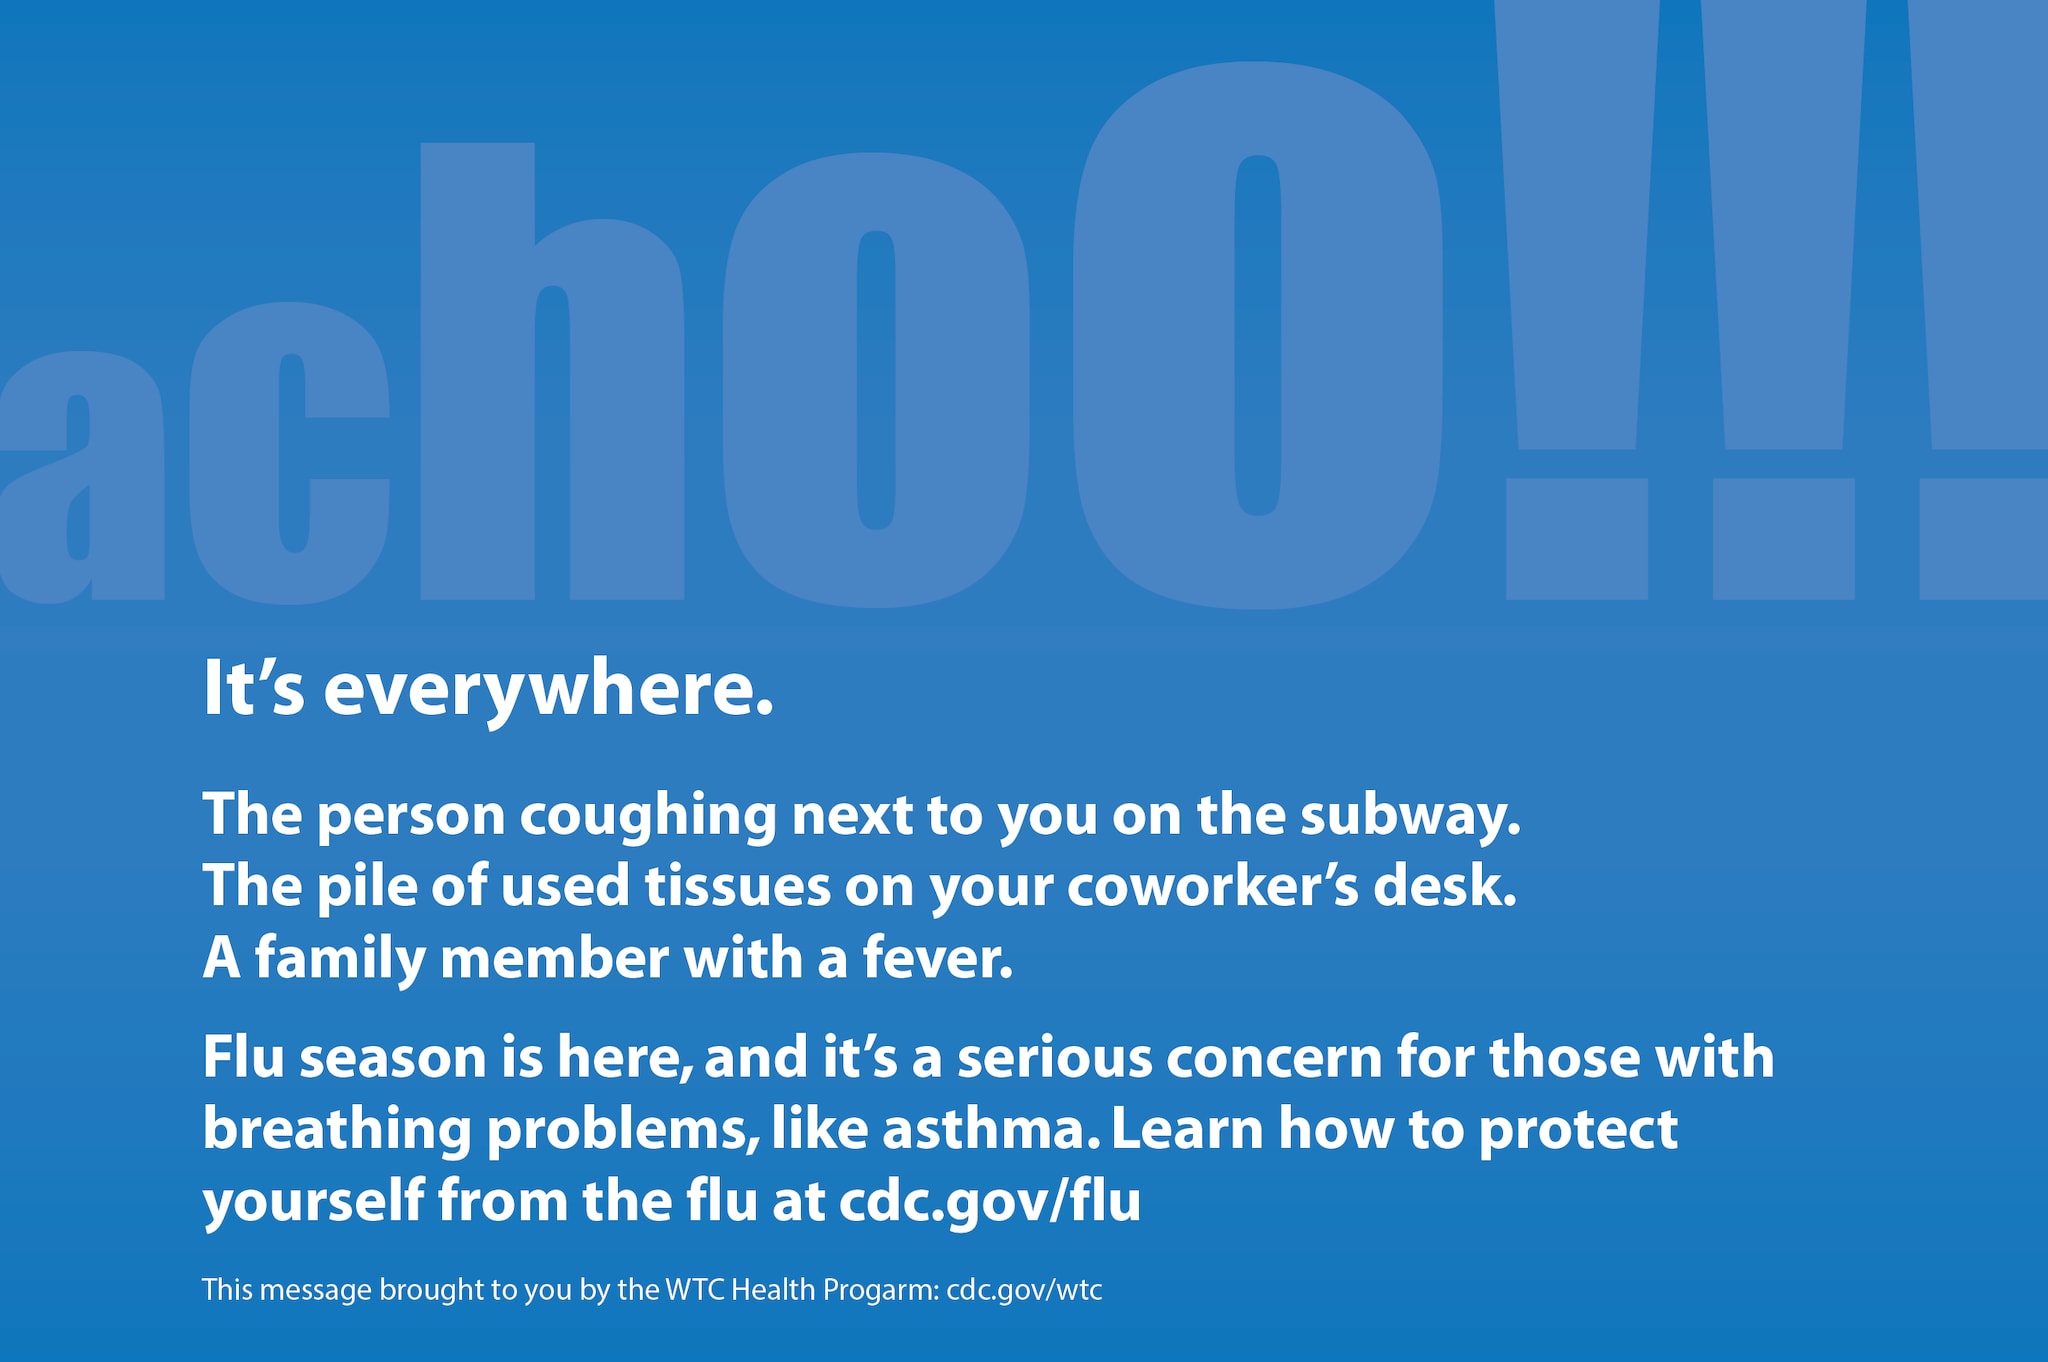 Flu season is a serious concern for those with breathing problems.  Learn how to protect yourself at cdc.gov/flu